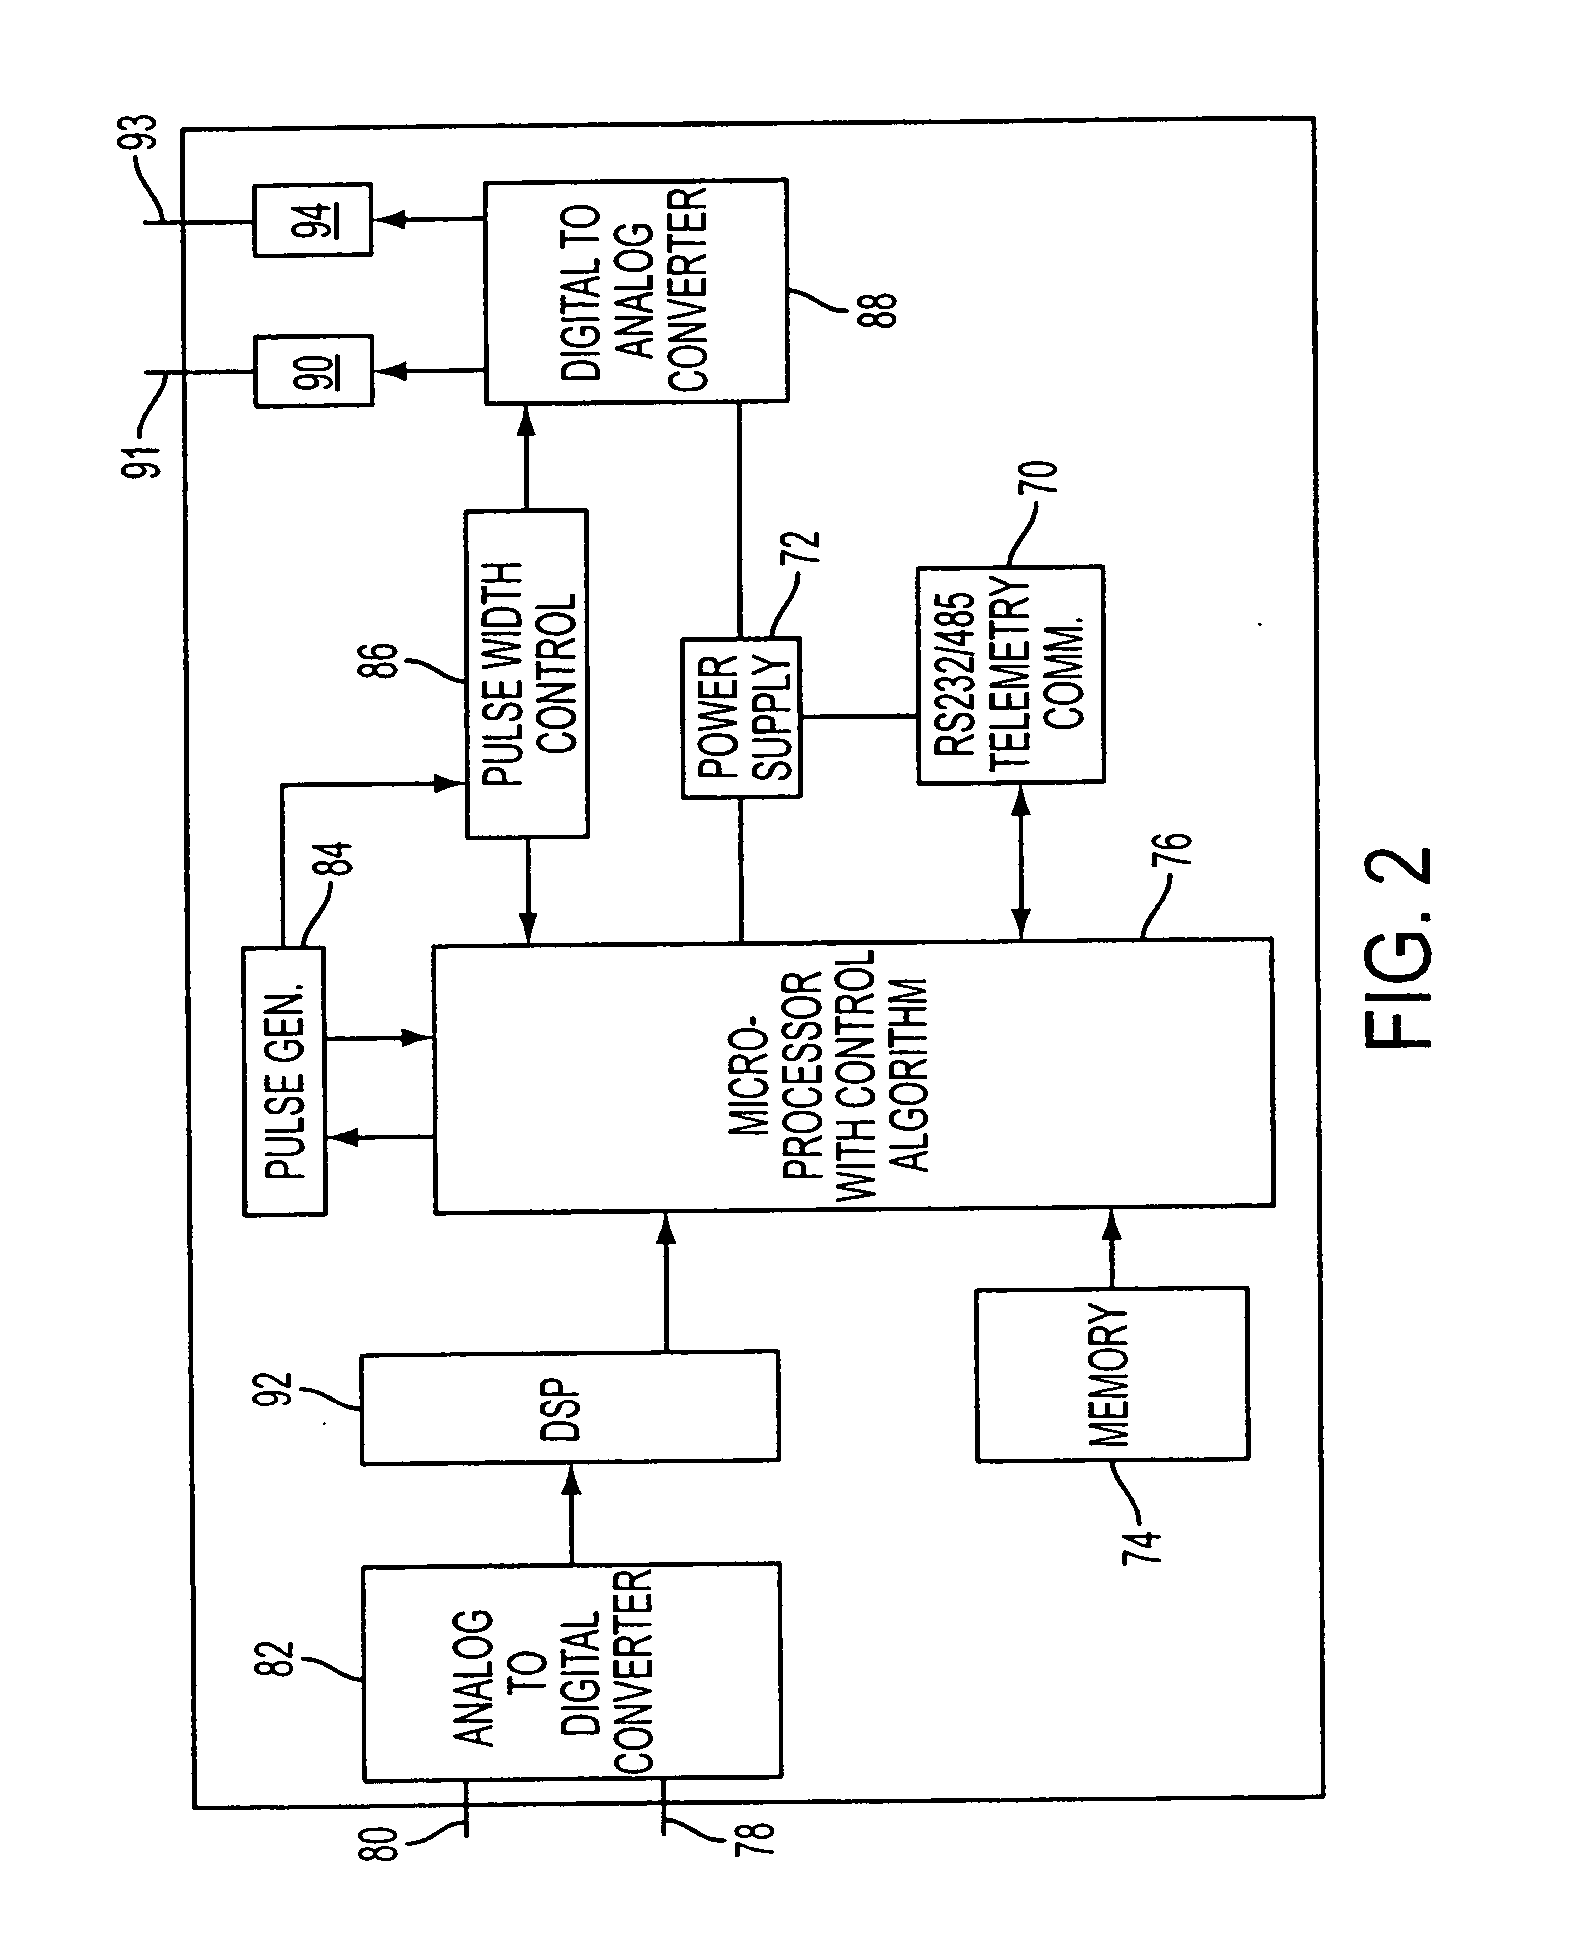 Methods and systems of achieving hemodynamic control through neuromodulation